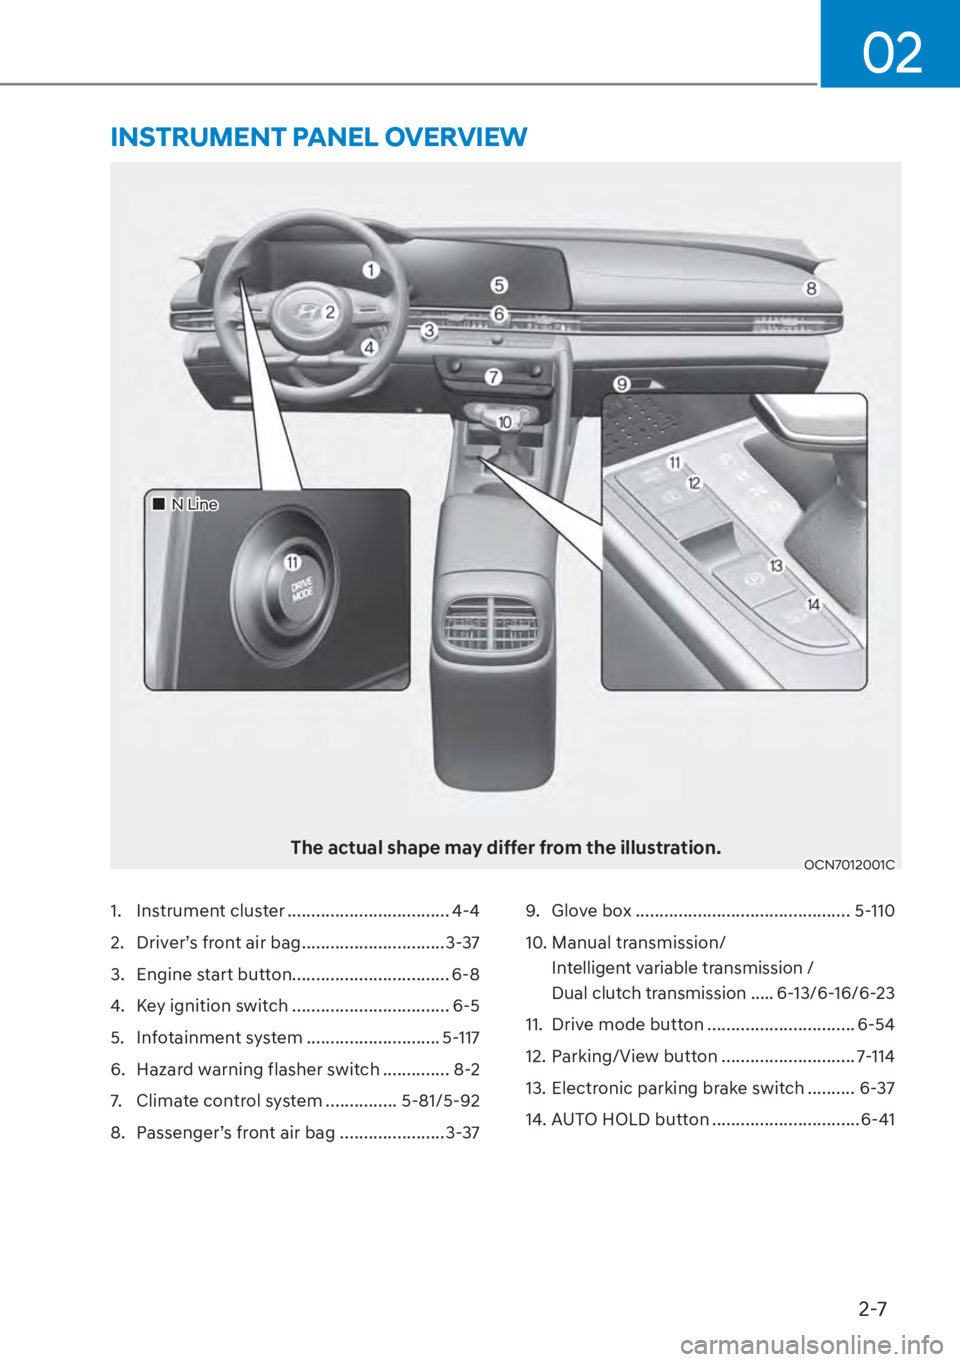 HYUNDAI ELANTRA 2023  Owners Manual 2-7
02
The actual shape may differ from the illustration.OCN7012001C
INSTRUMENT PANEL OVERVIEW
1. Instrument cluster .................................. 4-4
2.  Driver’s front air bag ...............